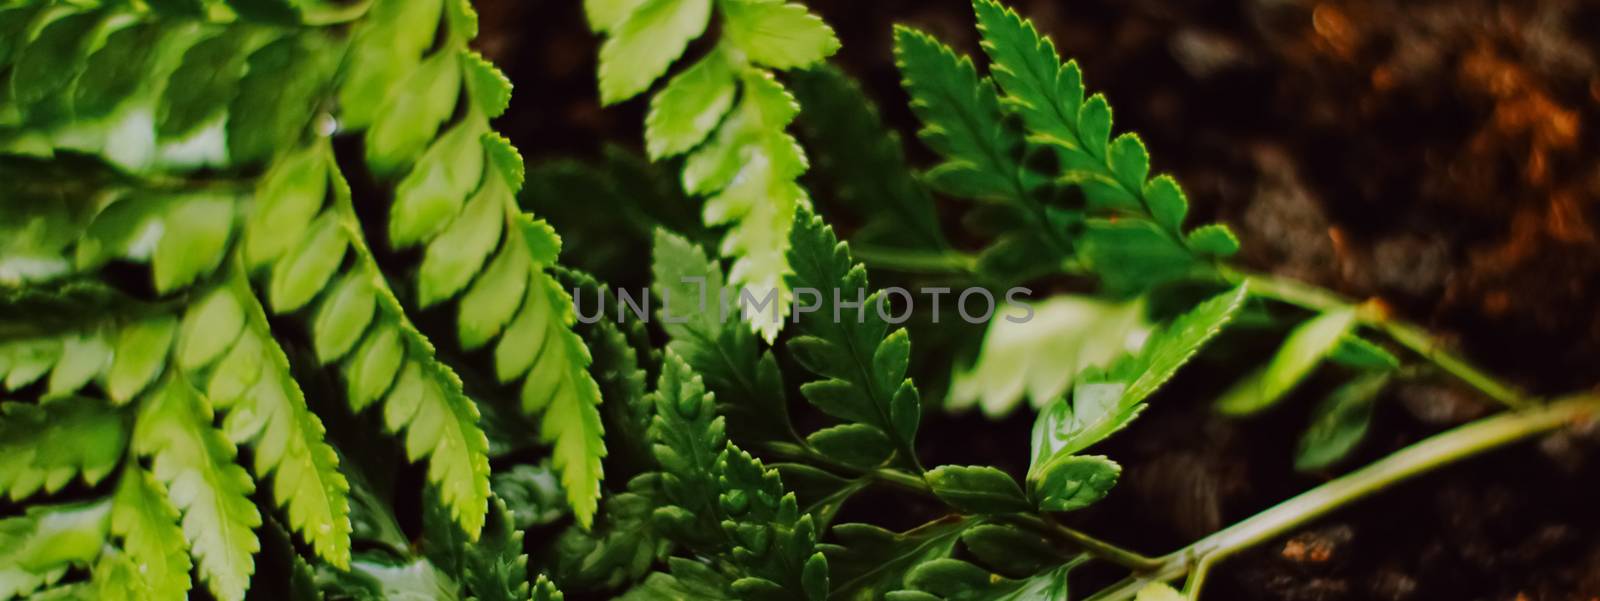 Tropical plant leaves in garden as botanical background, nature and environment close-up